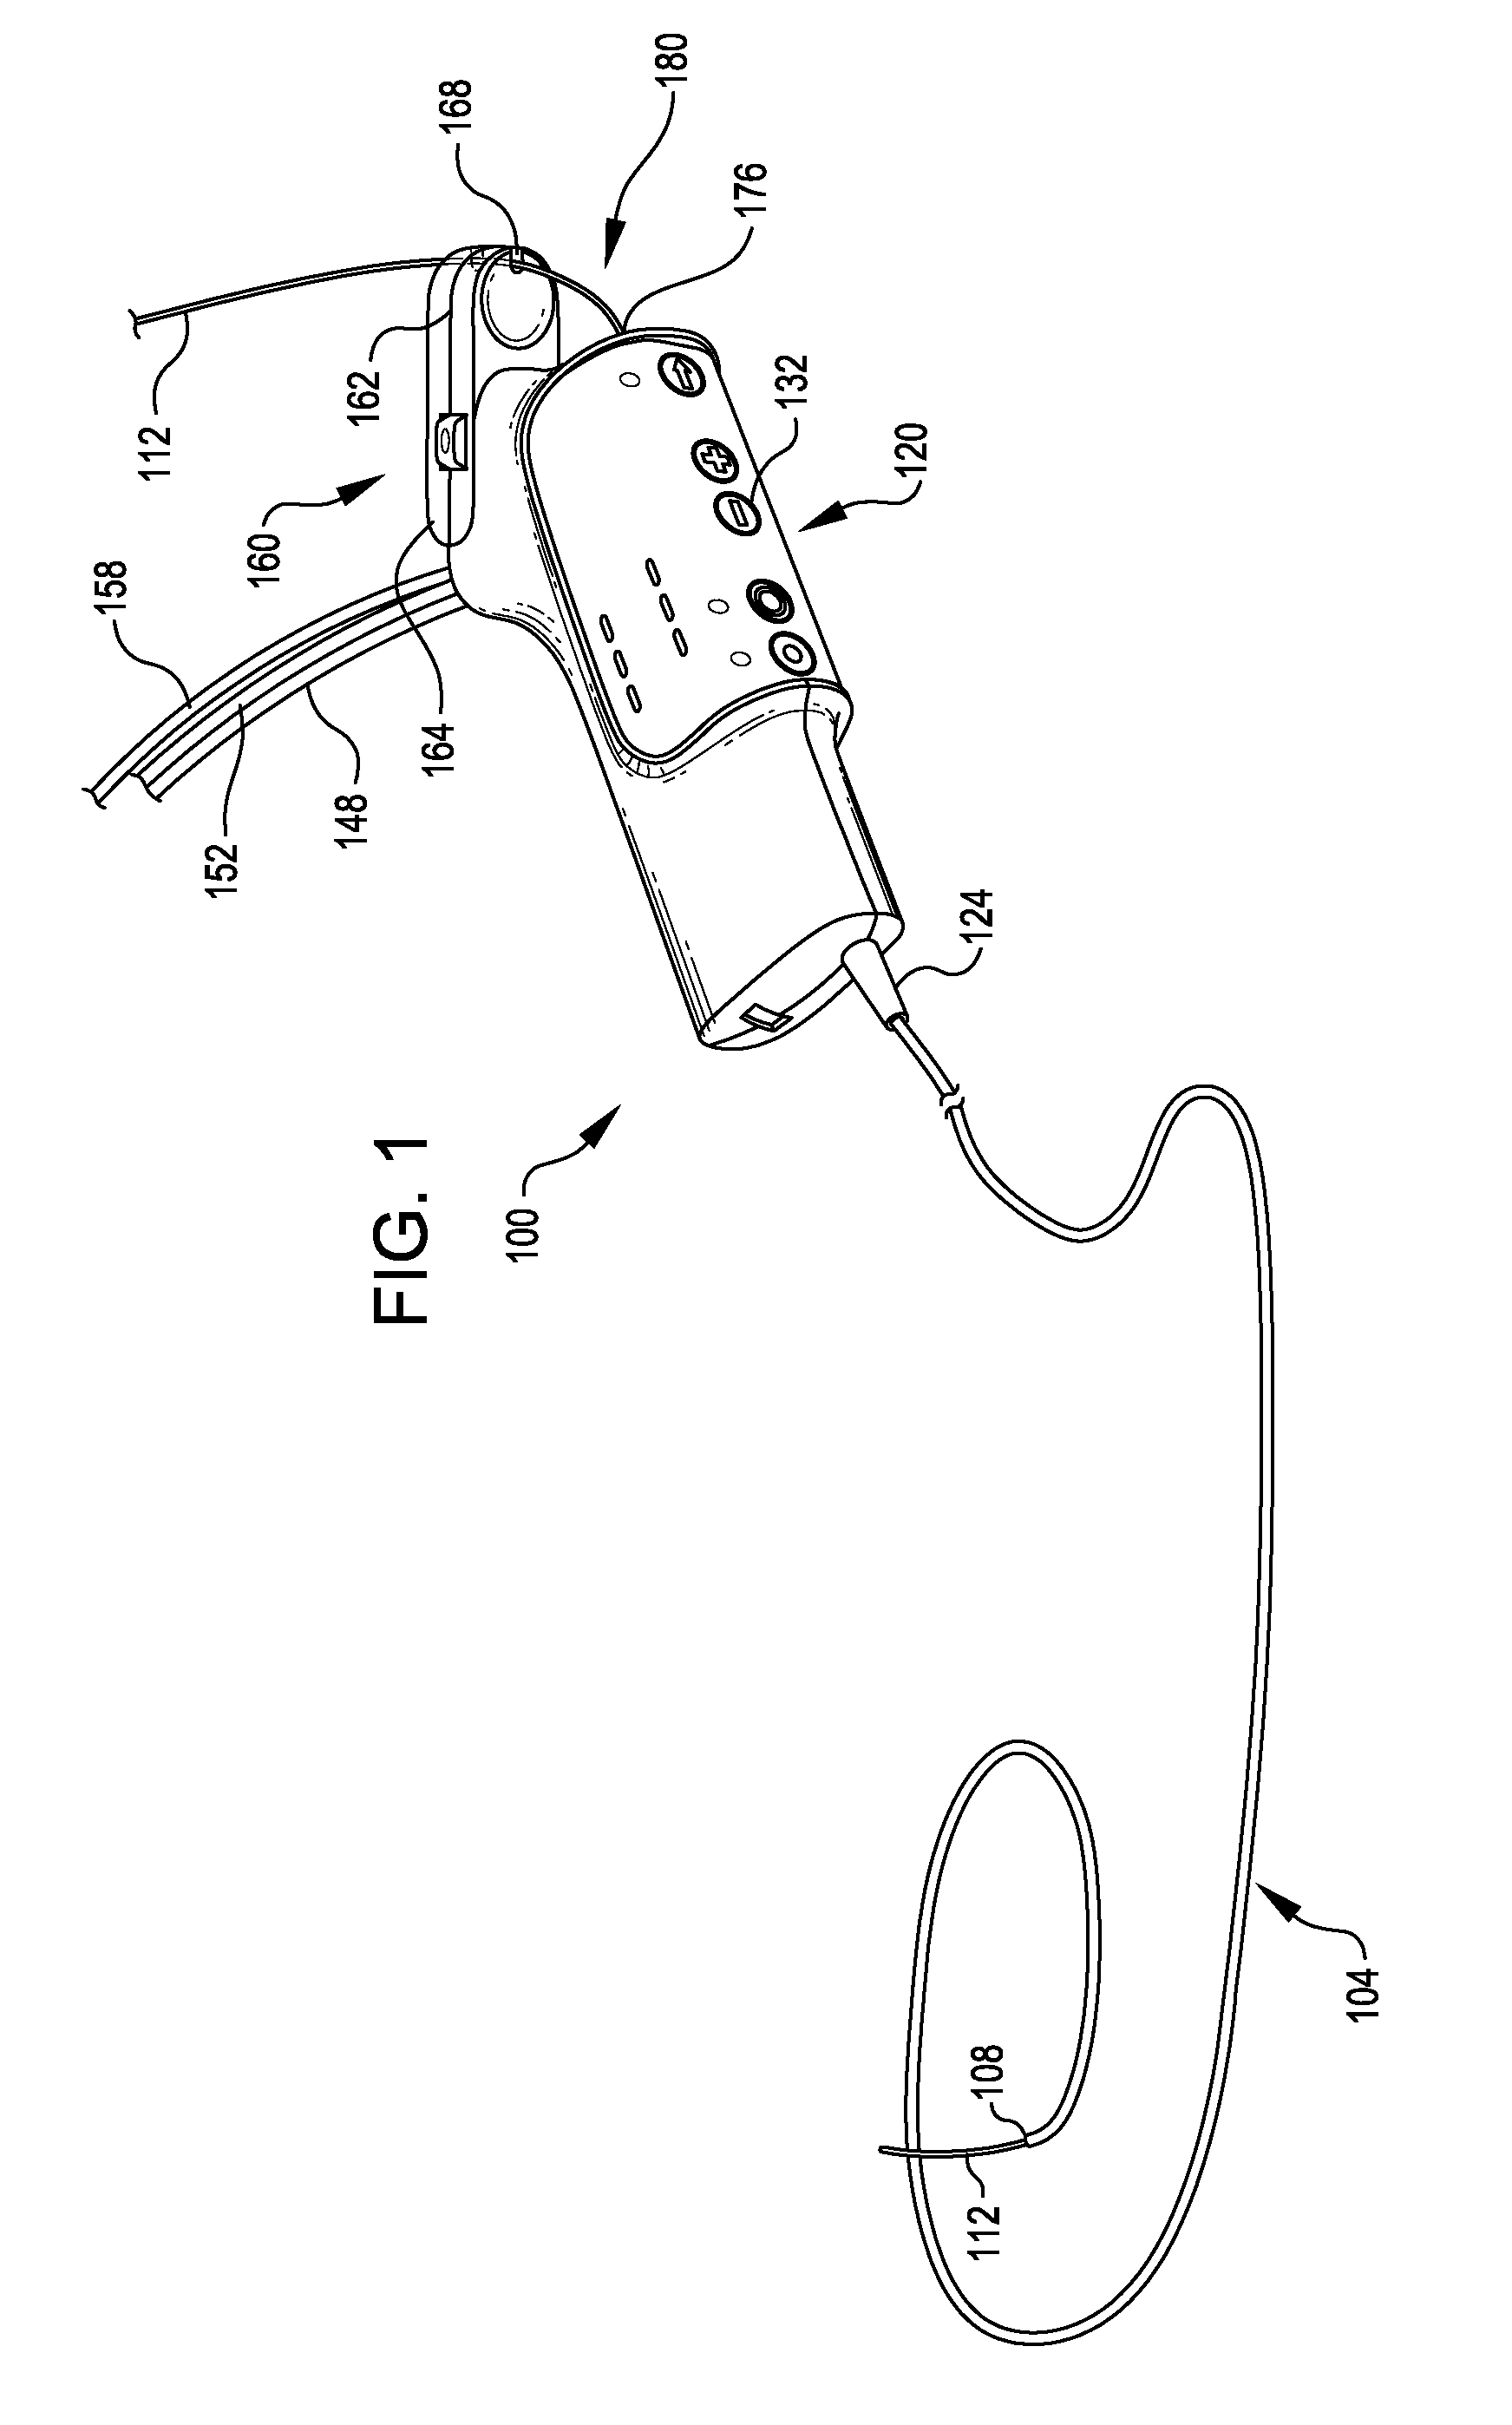 Interventional catheter assemblies incorporating guide wire brake and management systems